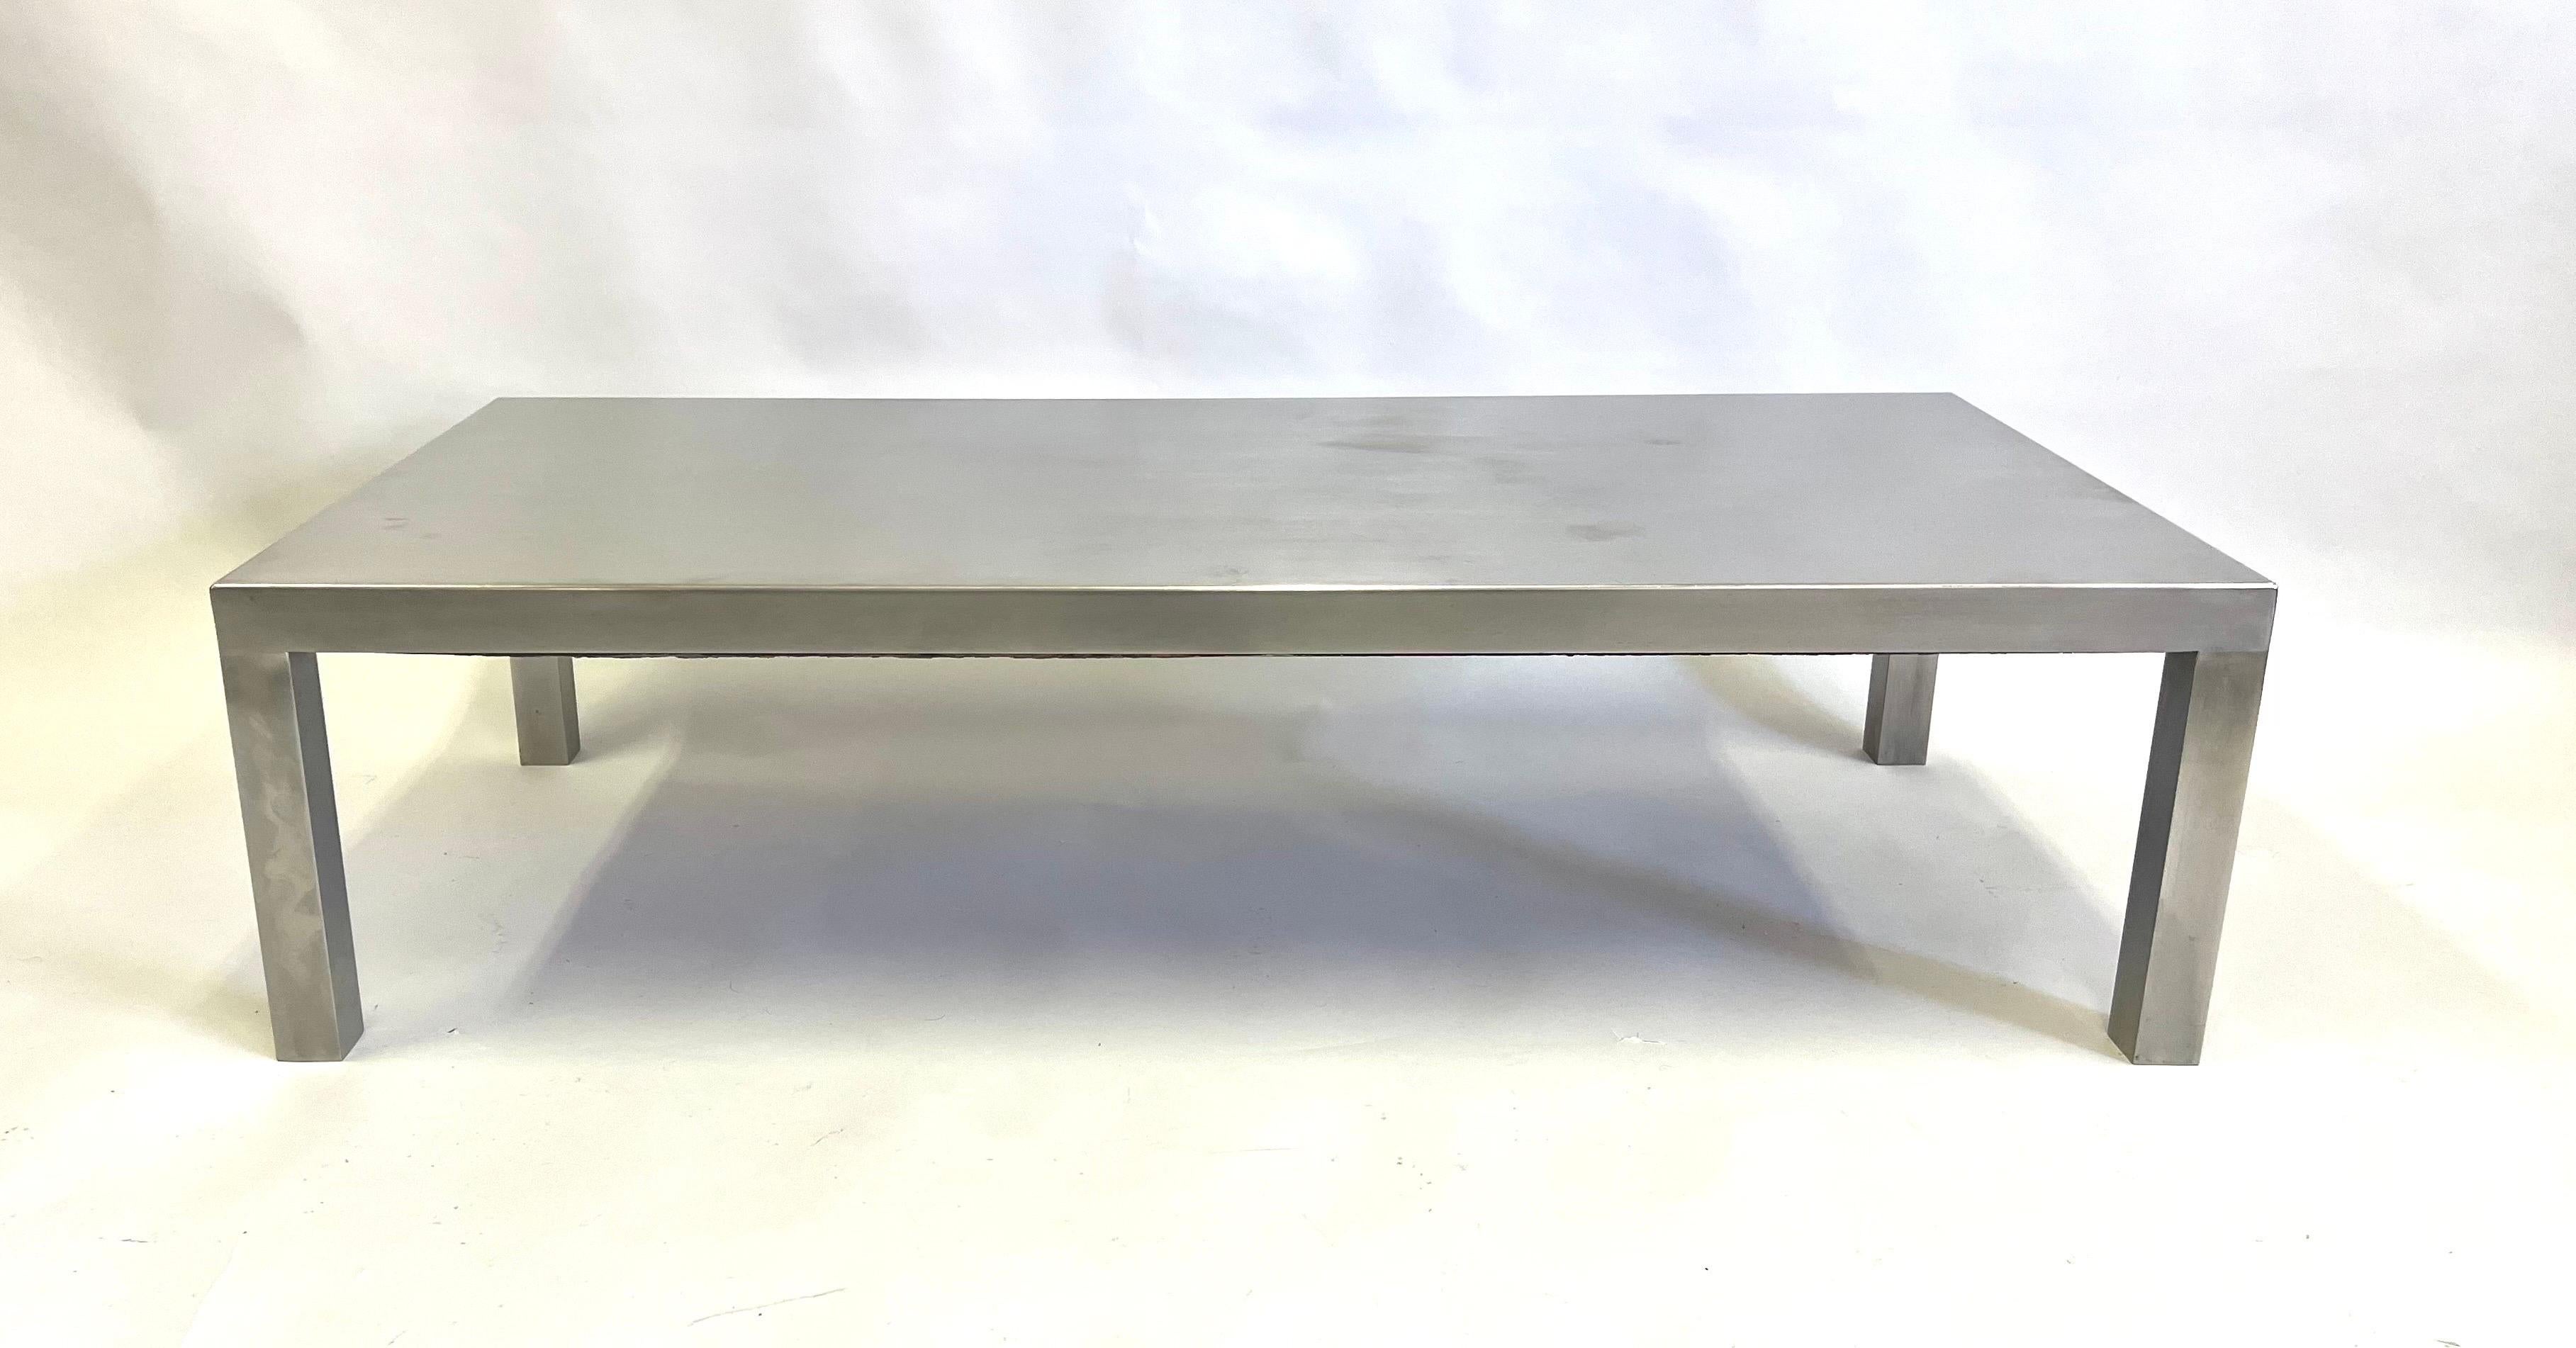 Elegant, sober, minimalist coffee table by Maria Pergay. This piece in matte polished stainless steel covering a black wood frame and is known as Table Droite. The piece was made for Maison et Jardin, Paris, 1971.

Maria Pergay was one of the